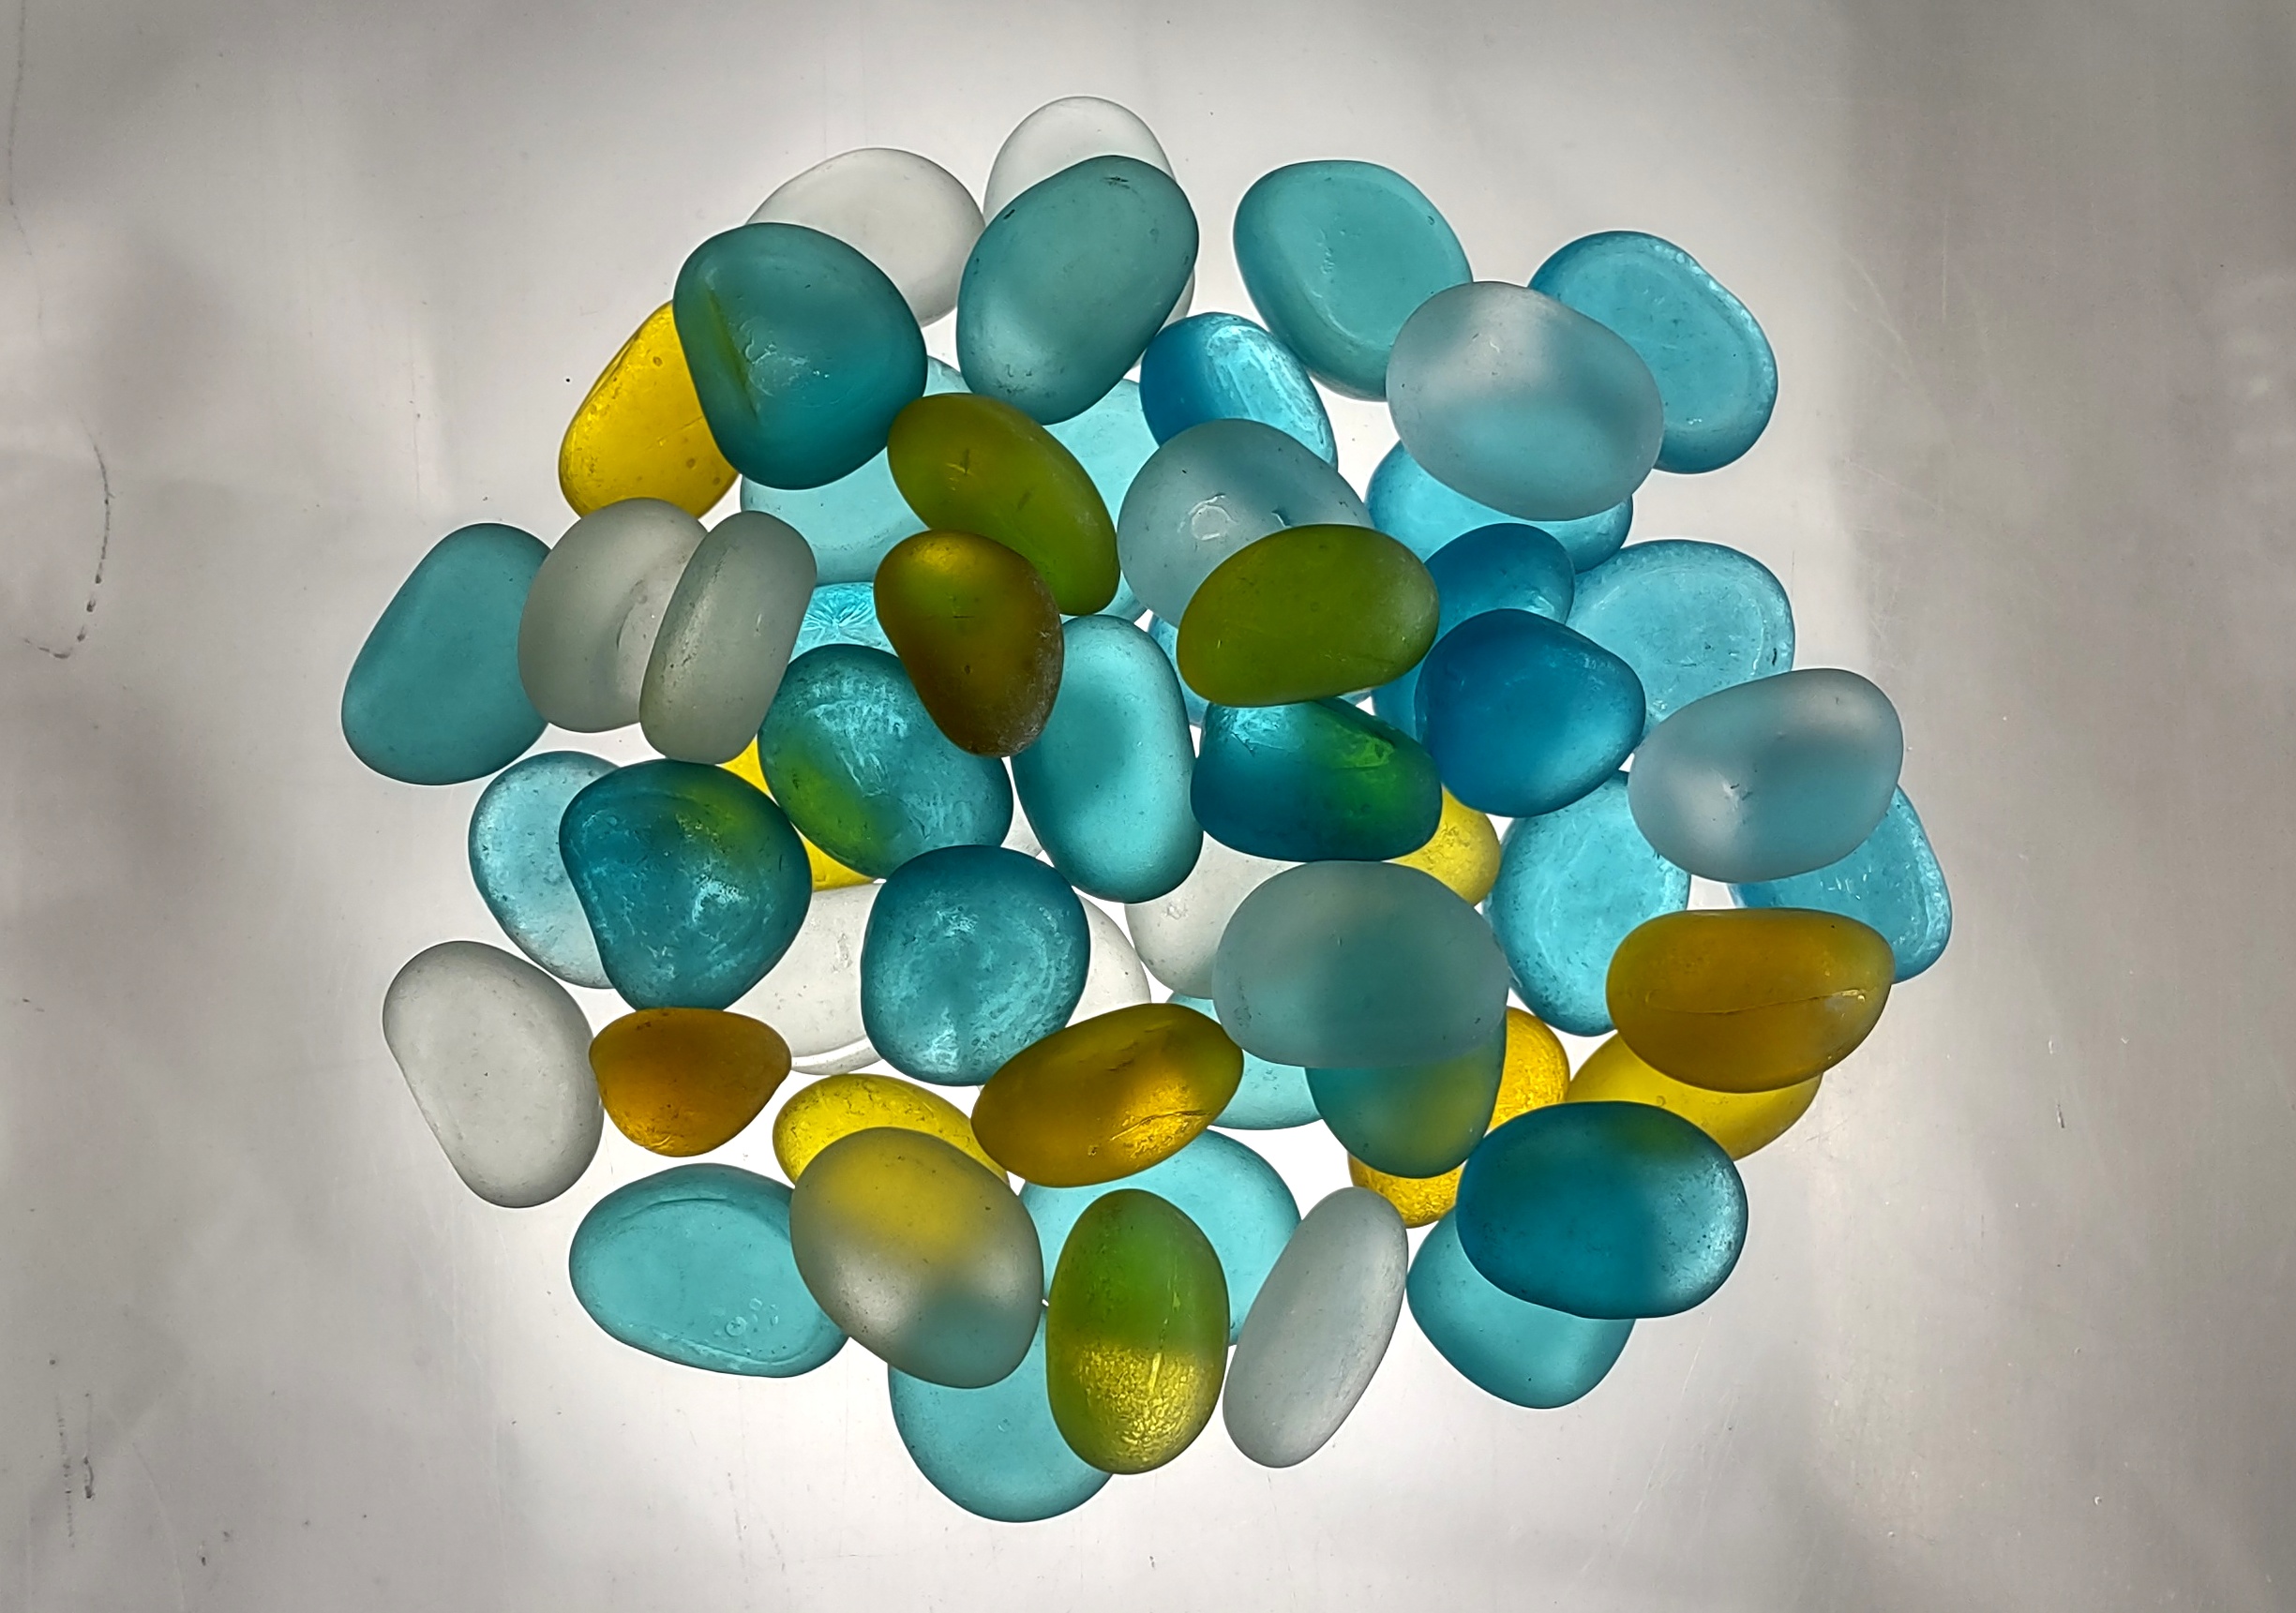 Beach Sea Glass Rounded Blue Green White Assorted Pebbles (approx. 1  Kilogram or 2.2 lbs. 1-1.5 inches) Man Made Tumbled Frosted Glass!